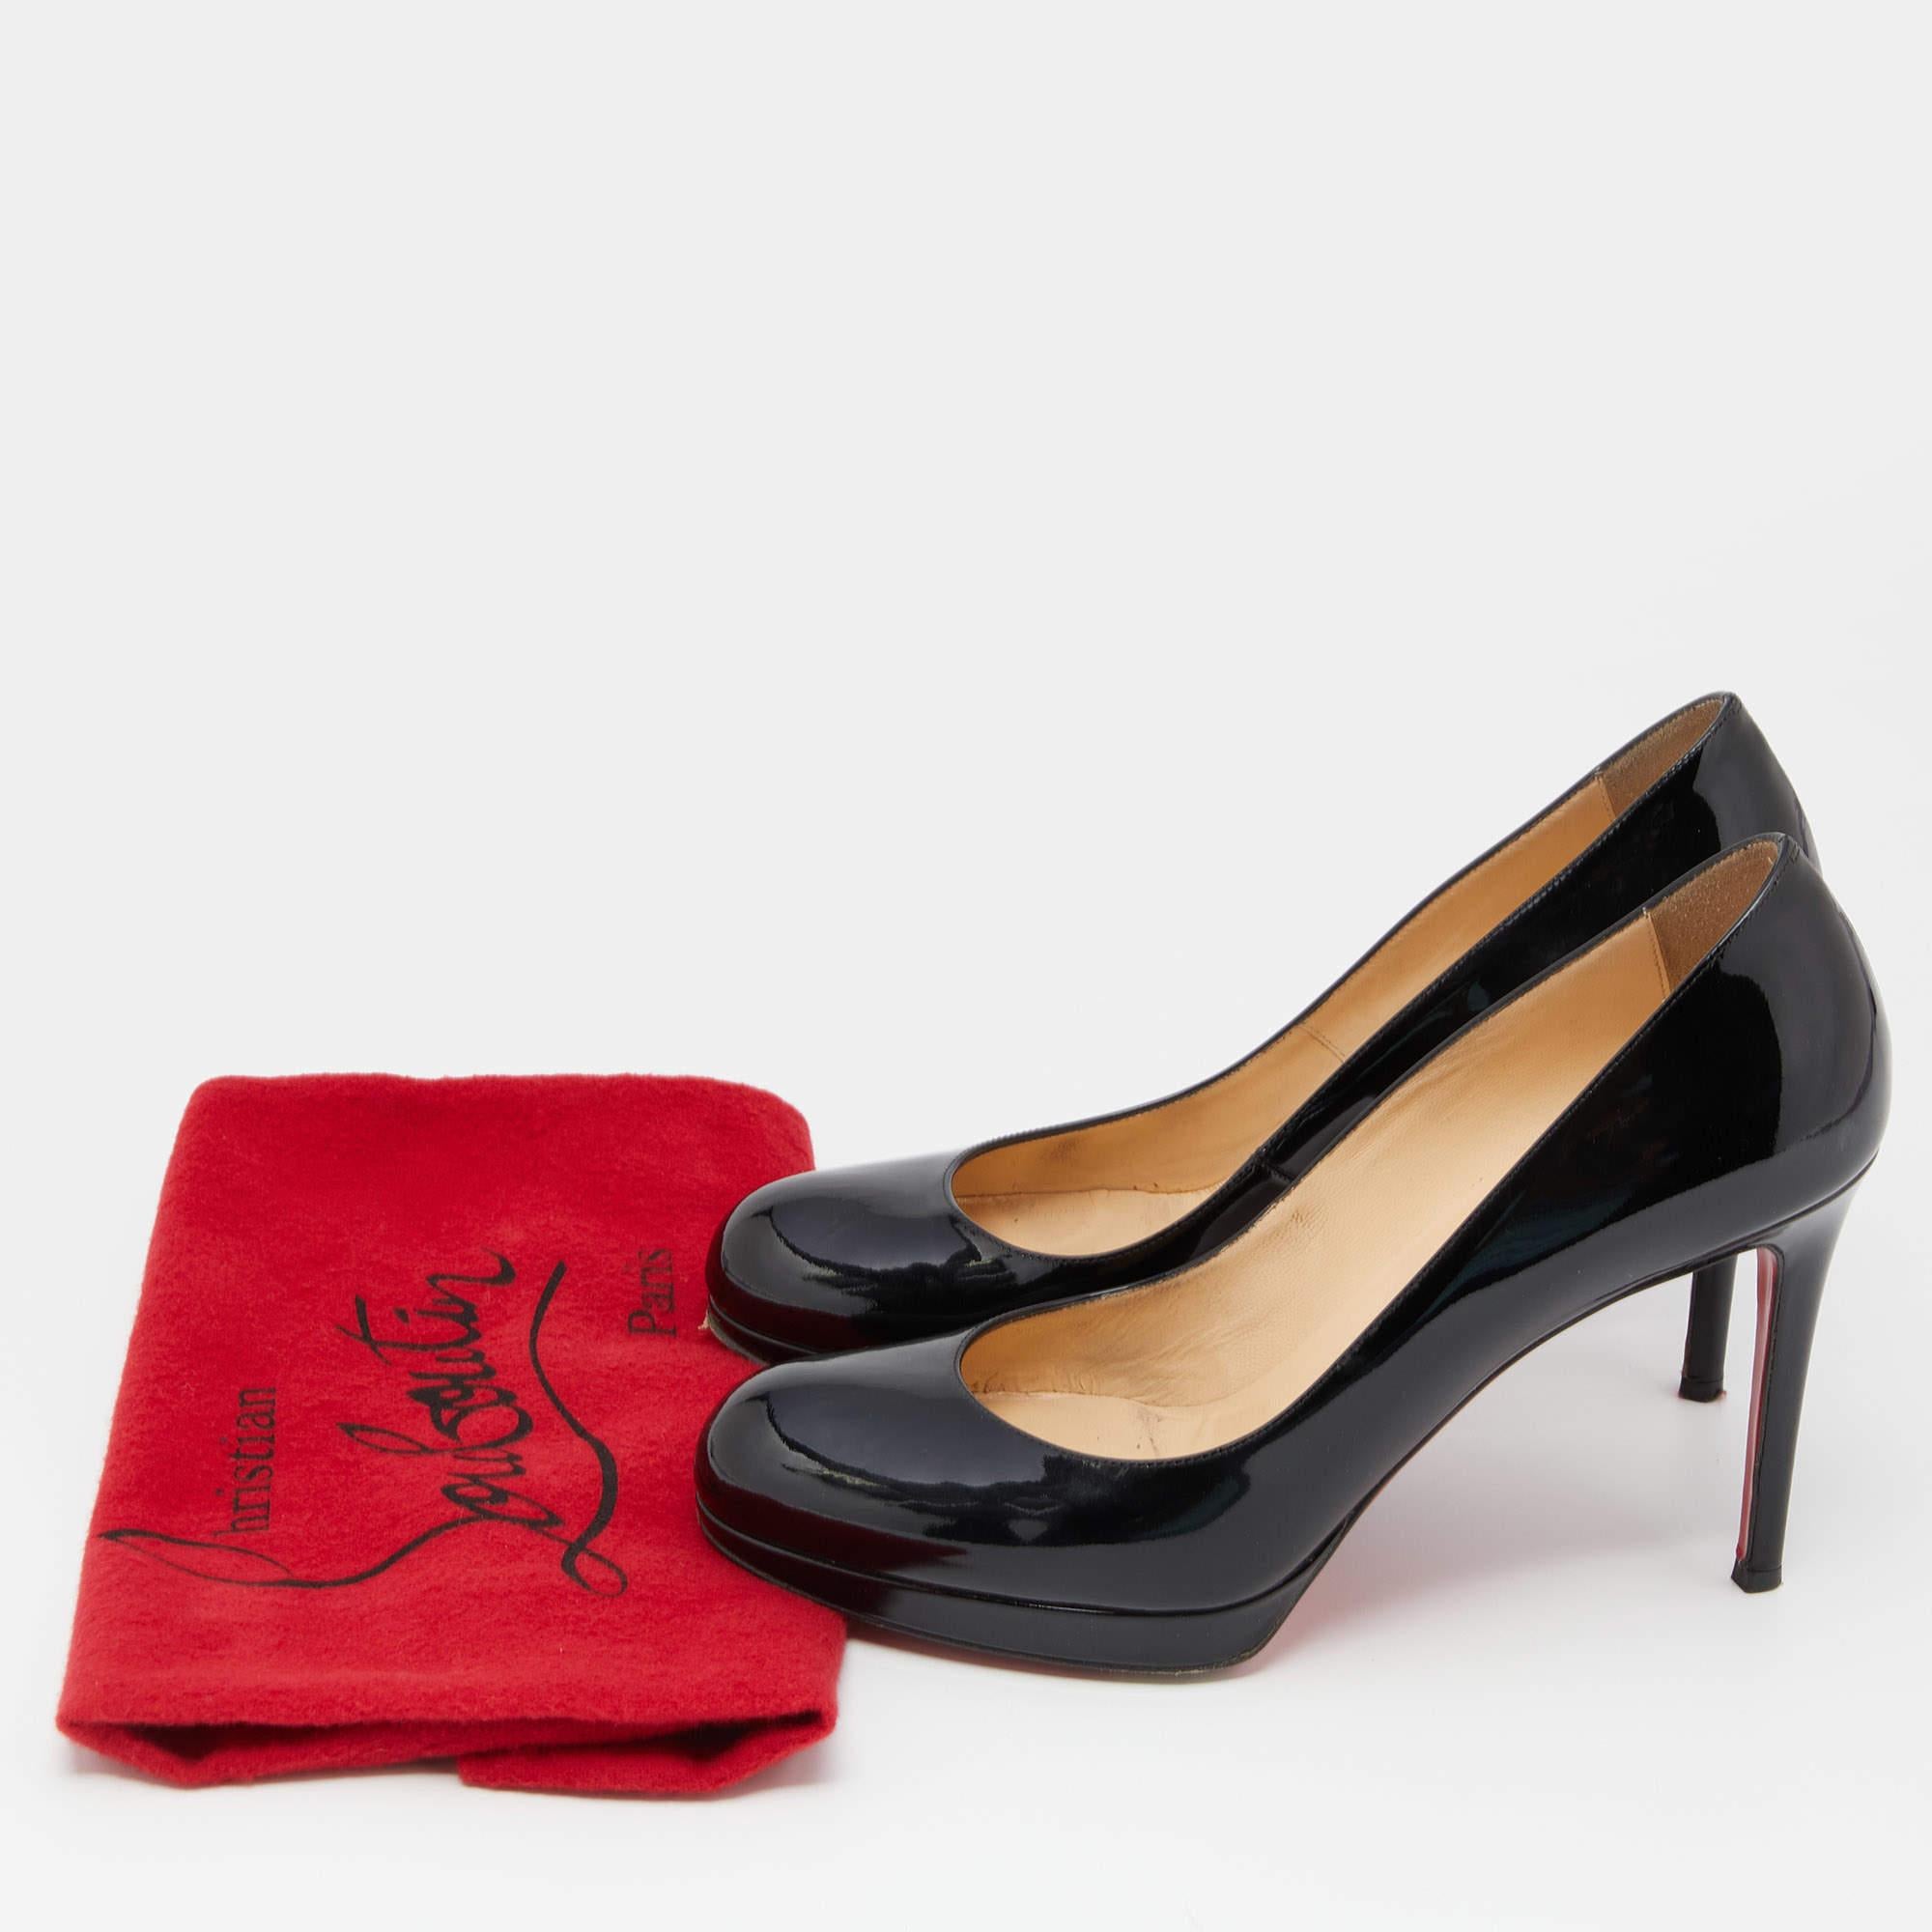 Christian Louboutin Black Patent Leather New Simple Pumps Size 38.5 For Sale 5